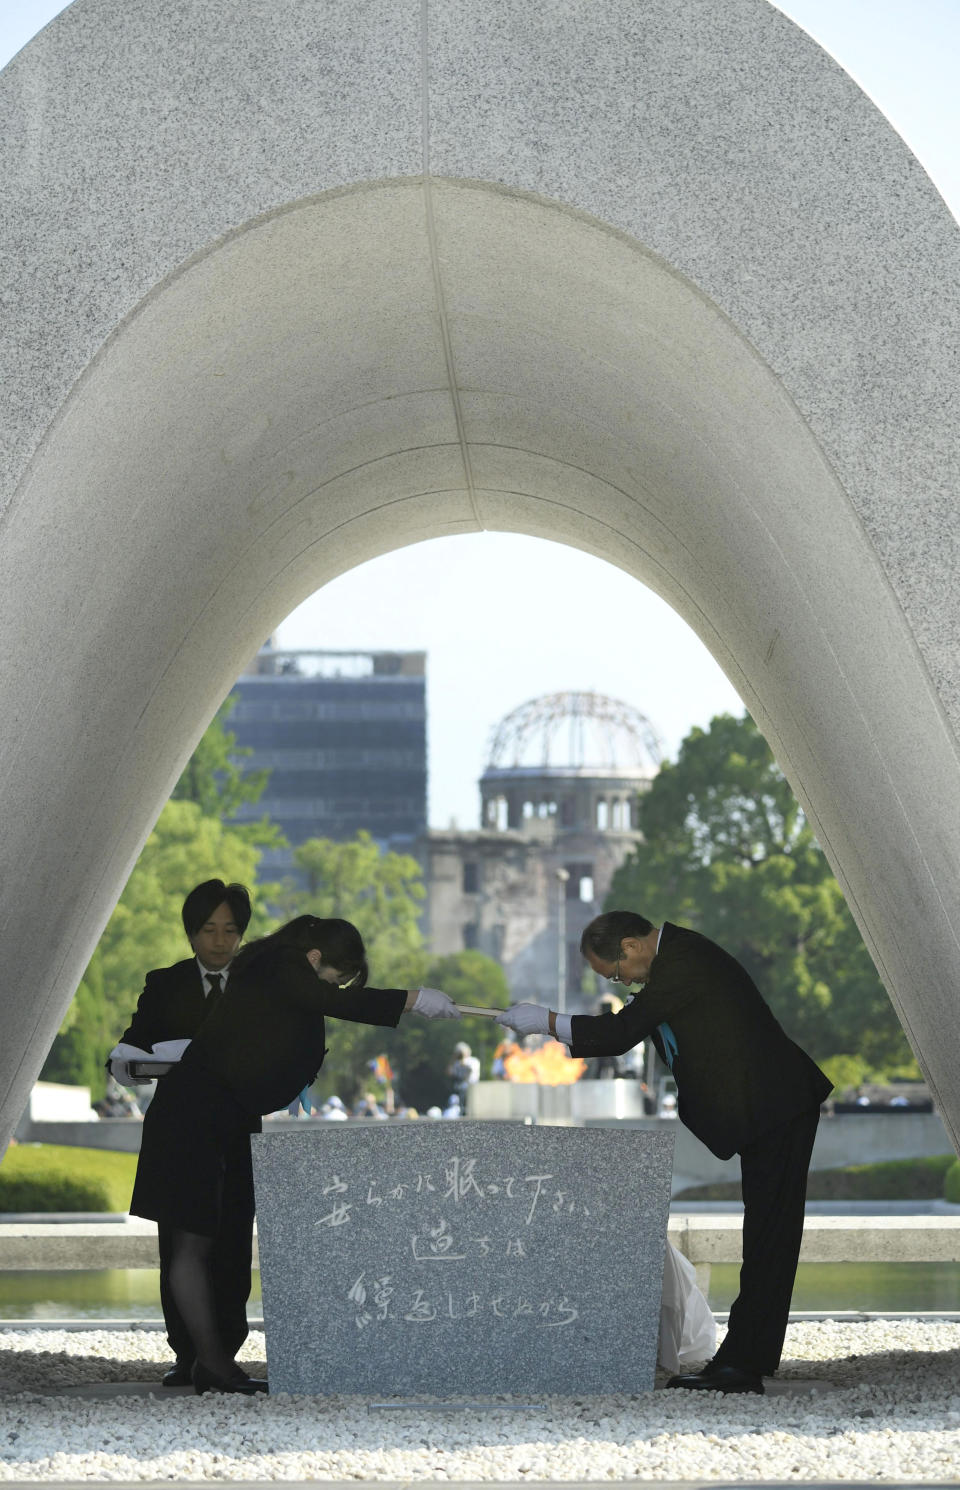 Hiroshima Mayor Kazumi Matsui, right, dedicates the list of the victims of atomic bombing to the cenotaph during a ceremony to mark the 73rd anniversary of the bombing at Hiroshima Peace Memorial Park in Hiroshima, western Japan, Monday, Aug. 6, 2018. Matsui raised concerns in his peace address about the rise of egocentric policies in the world and warned against the idea of nuclear deterrence as a threat to global security. The Atomic Bomb Dome is seen in the background. (Yohei Nishimura/Kyodo News via AP)